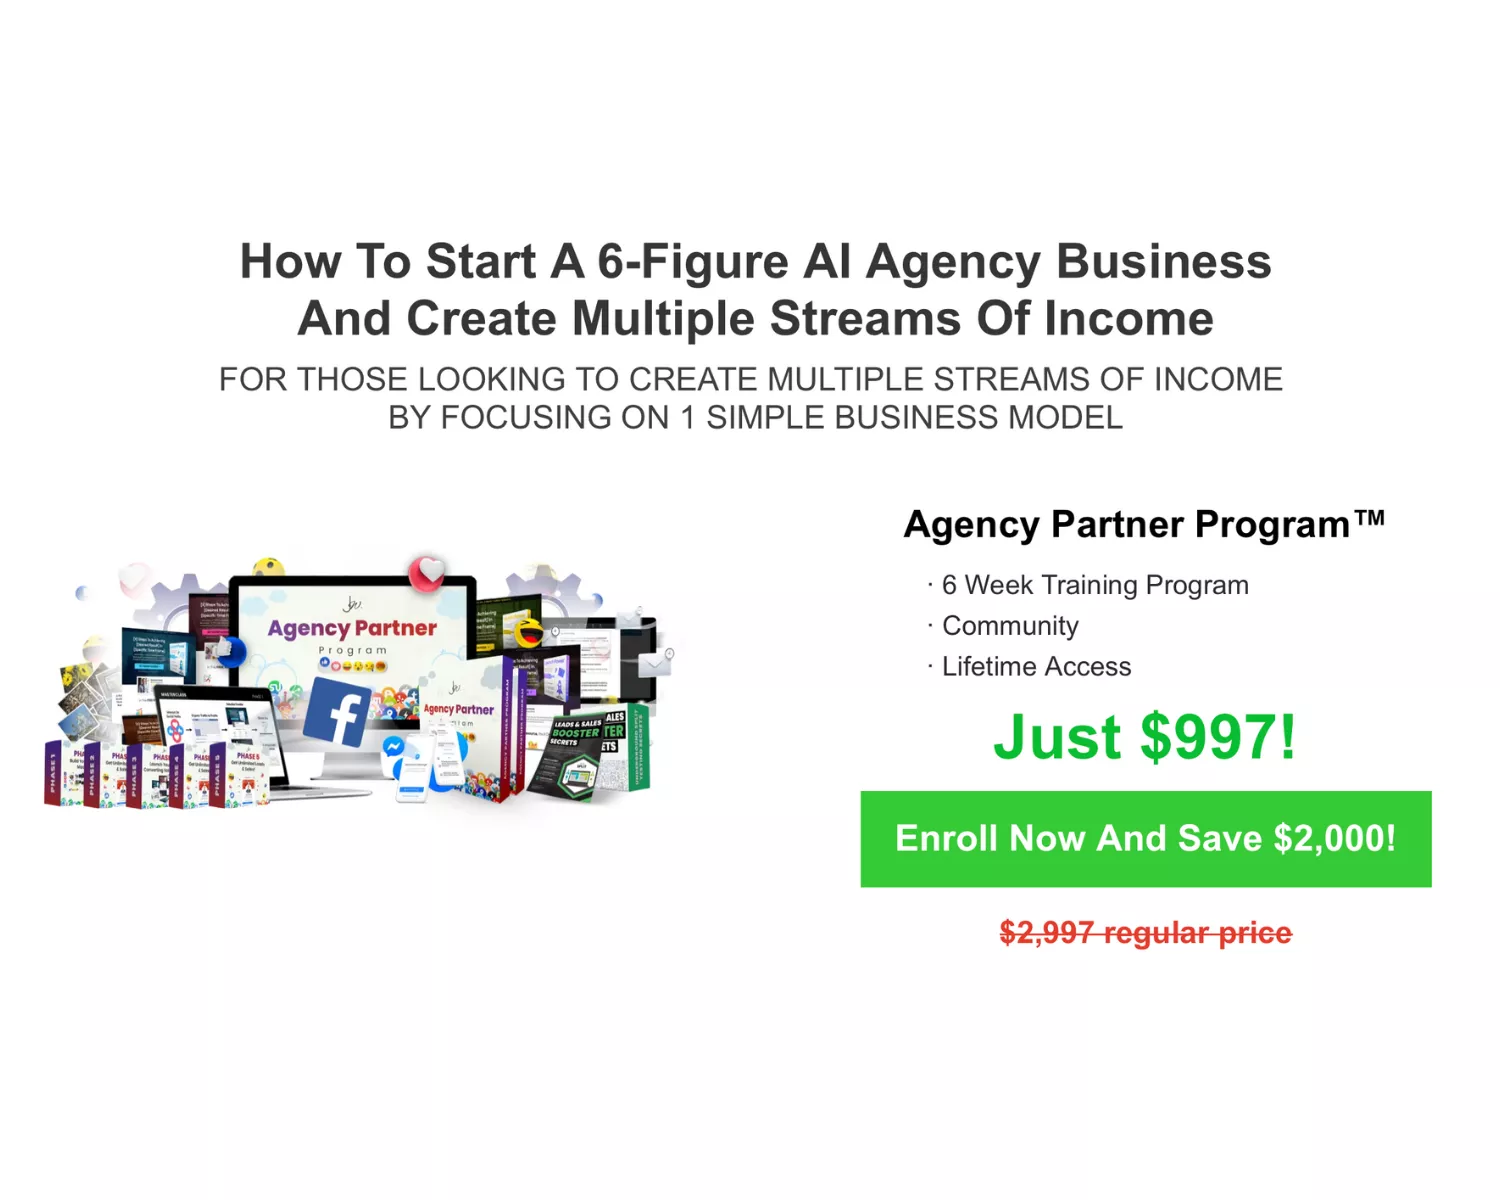 A 'limited time offer' for the Agency Partner Program.